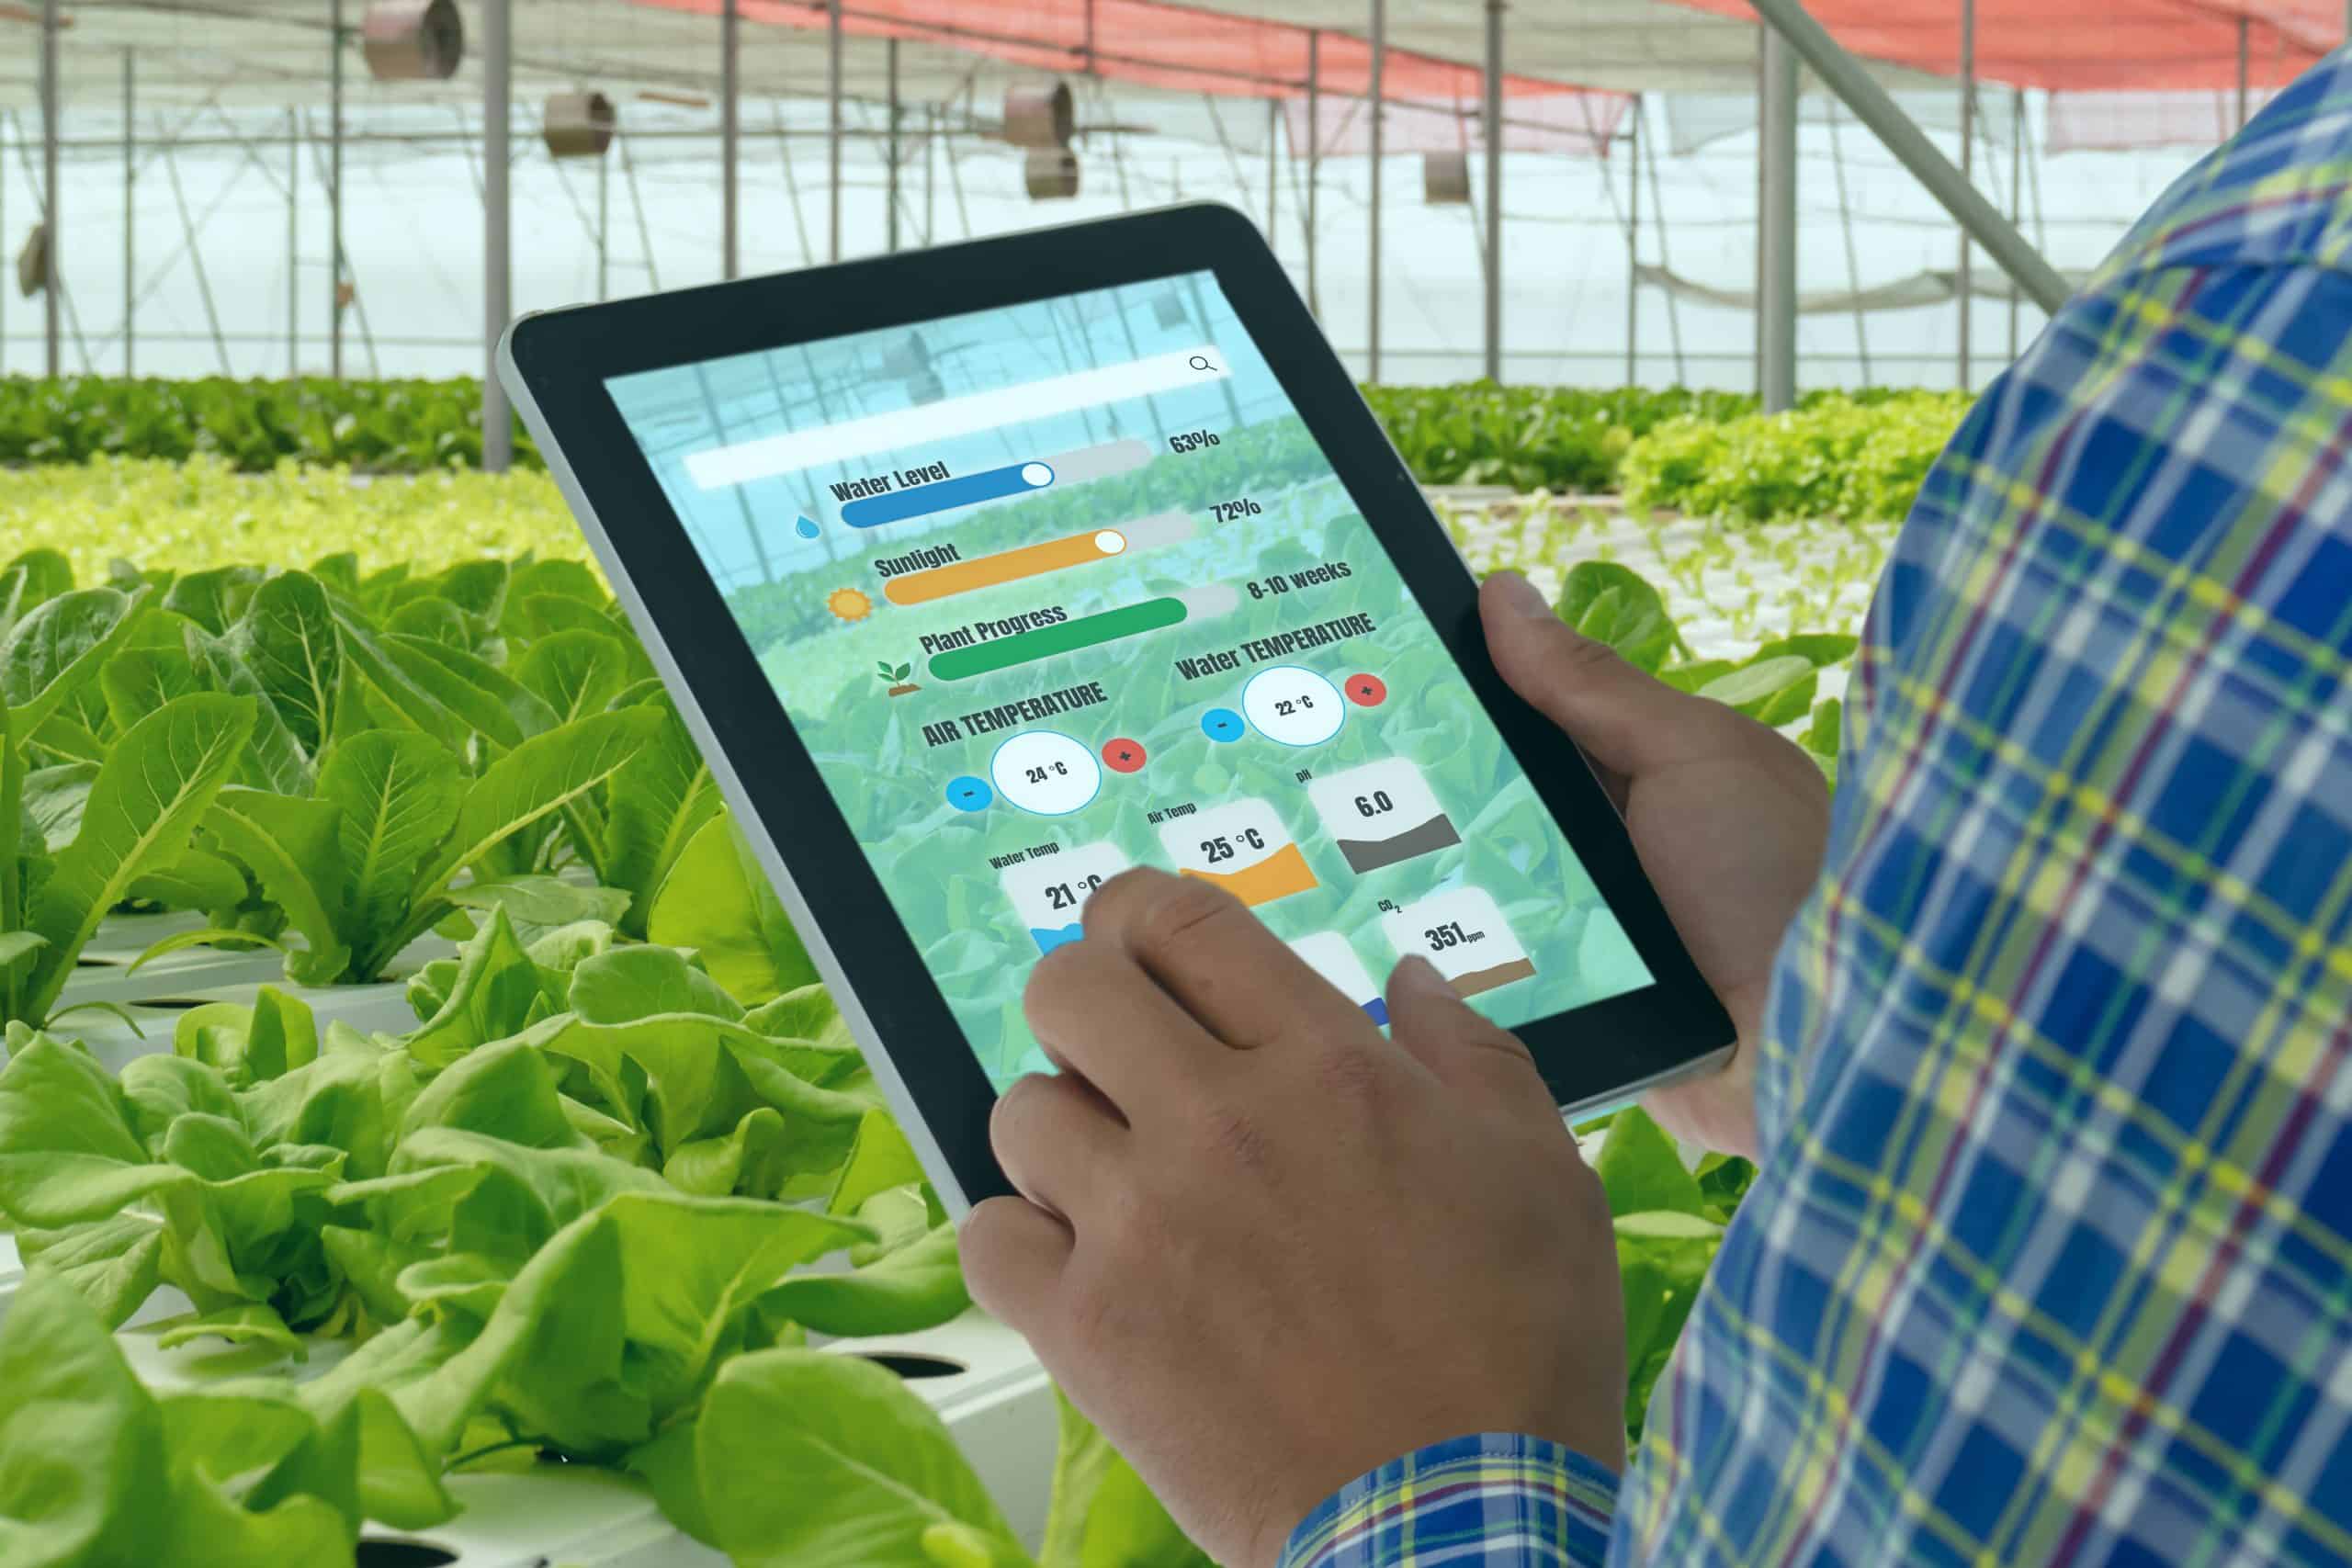 Iot,smart,industry,robot,4.0,agriculture,concept,industrial,agronomist,farmer,using,tablet